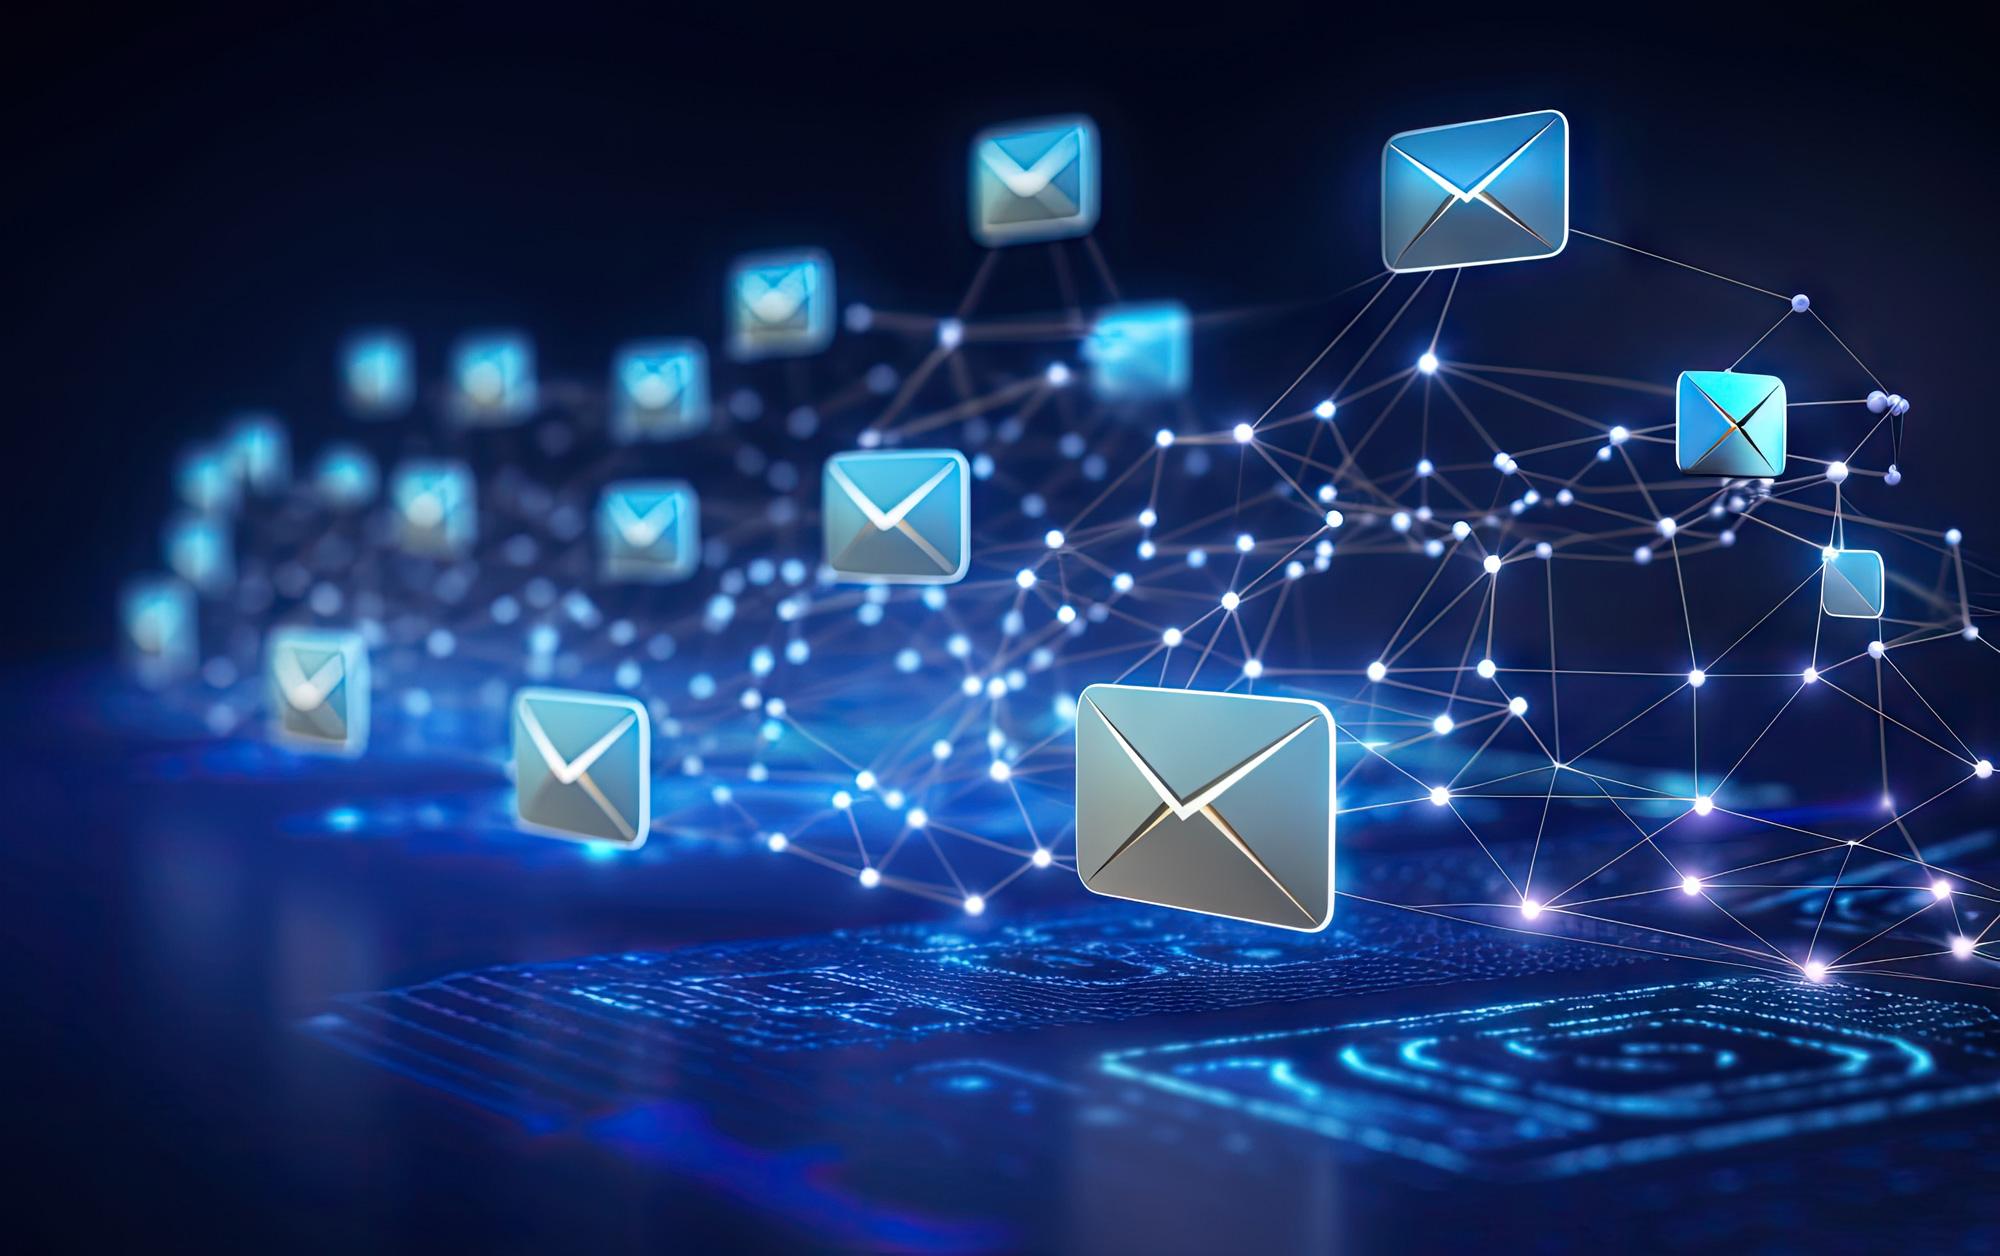 Mail icons over abstract technology background